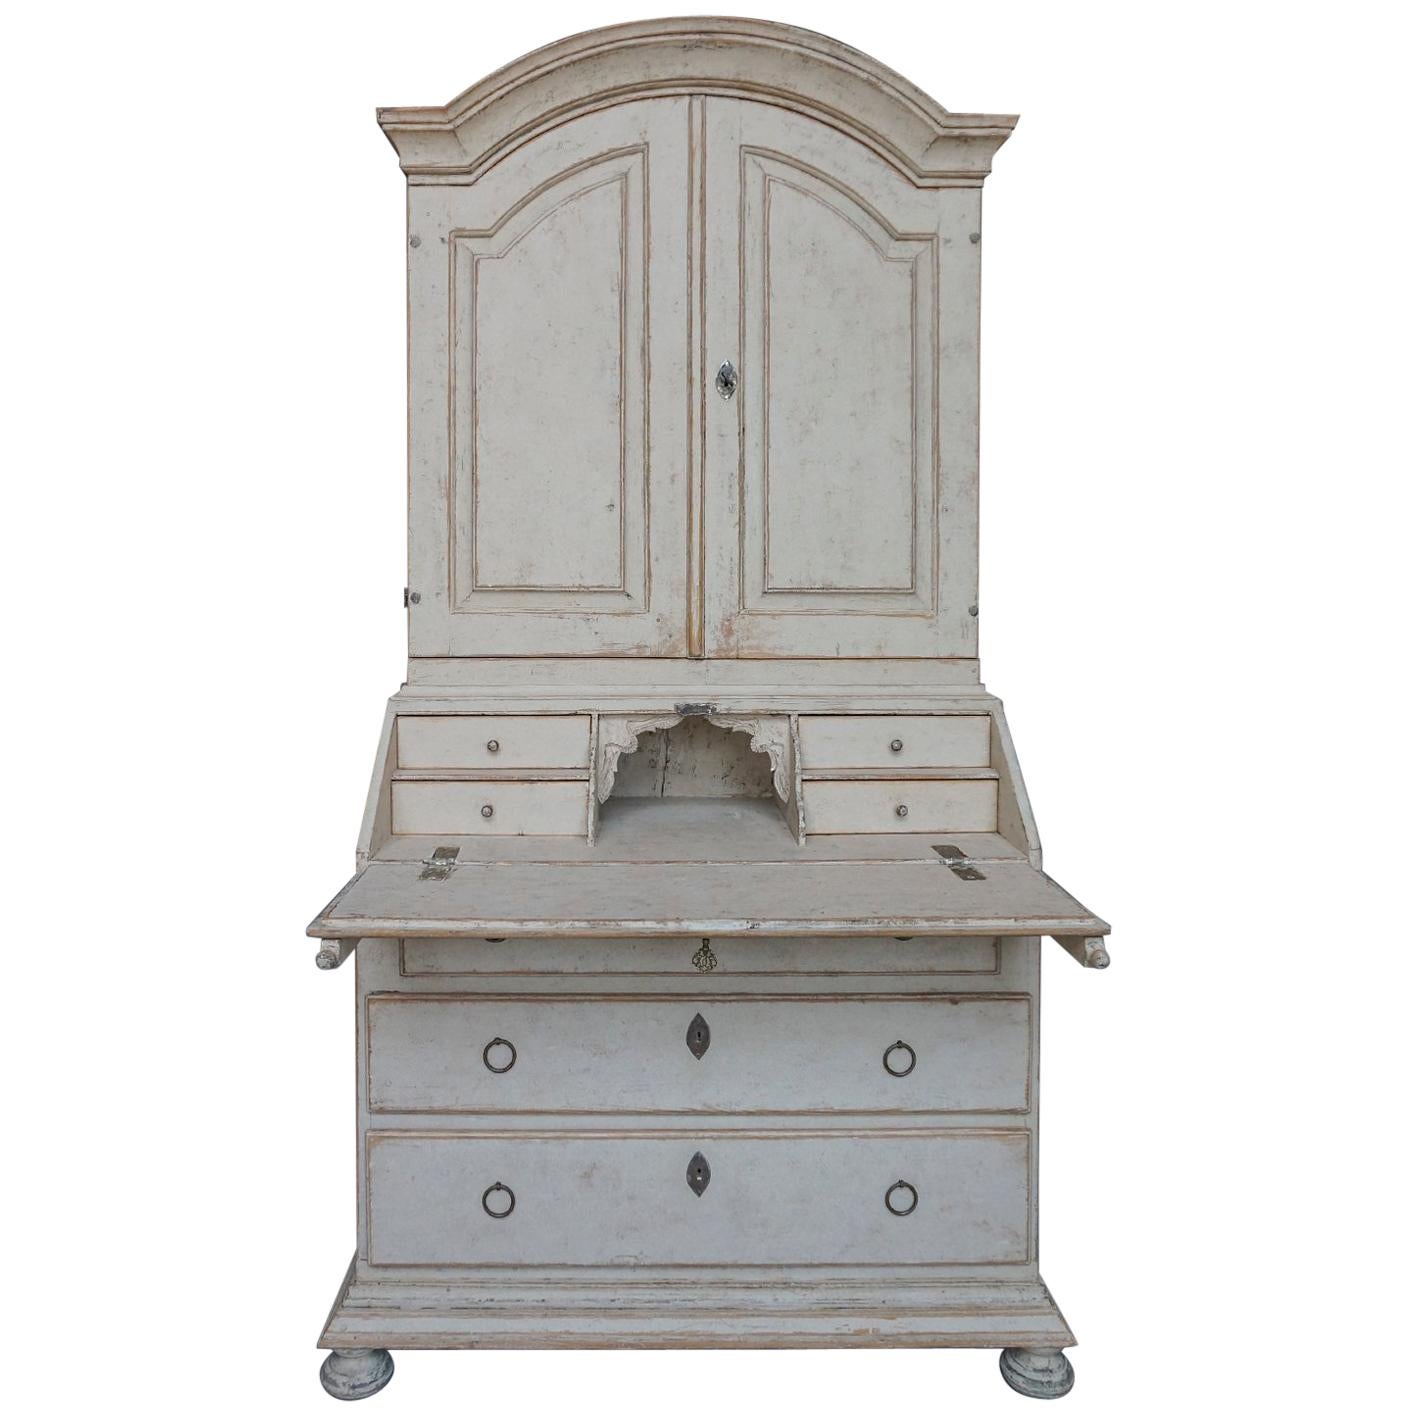 Period Gustavian Secretary with Library